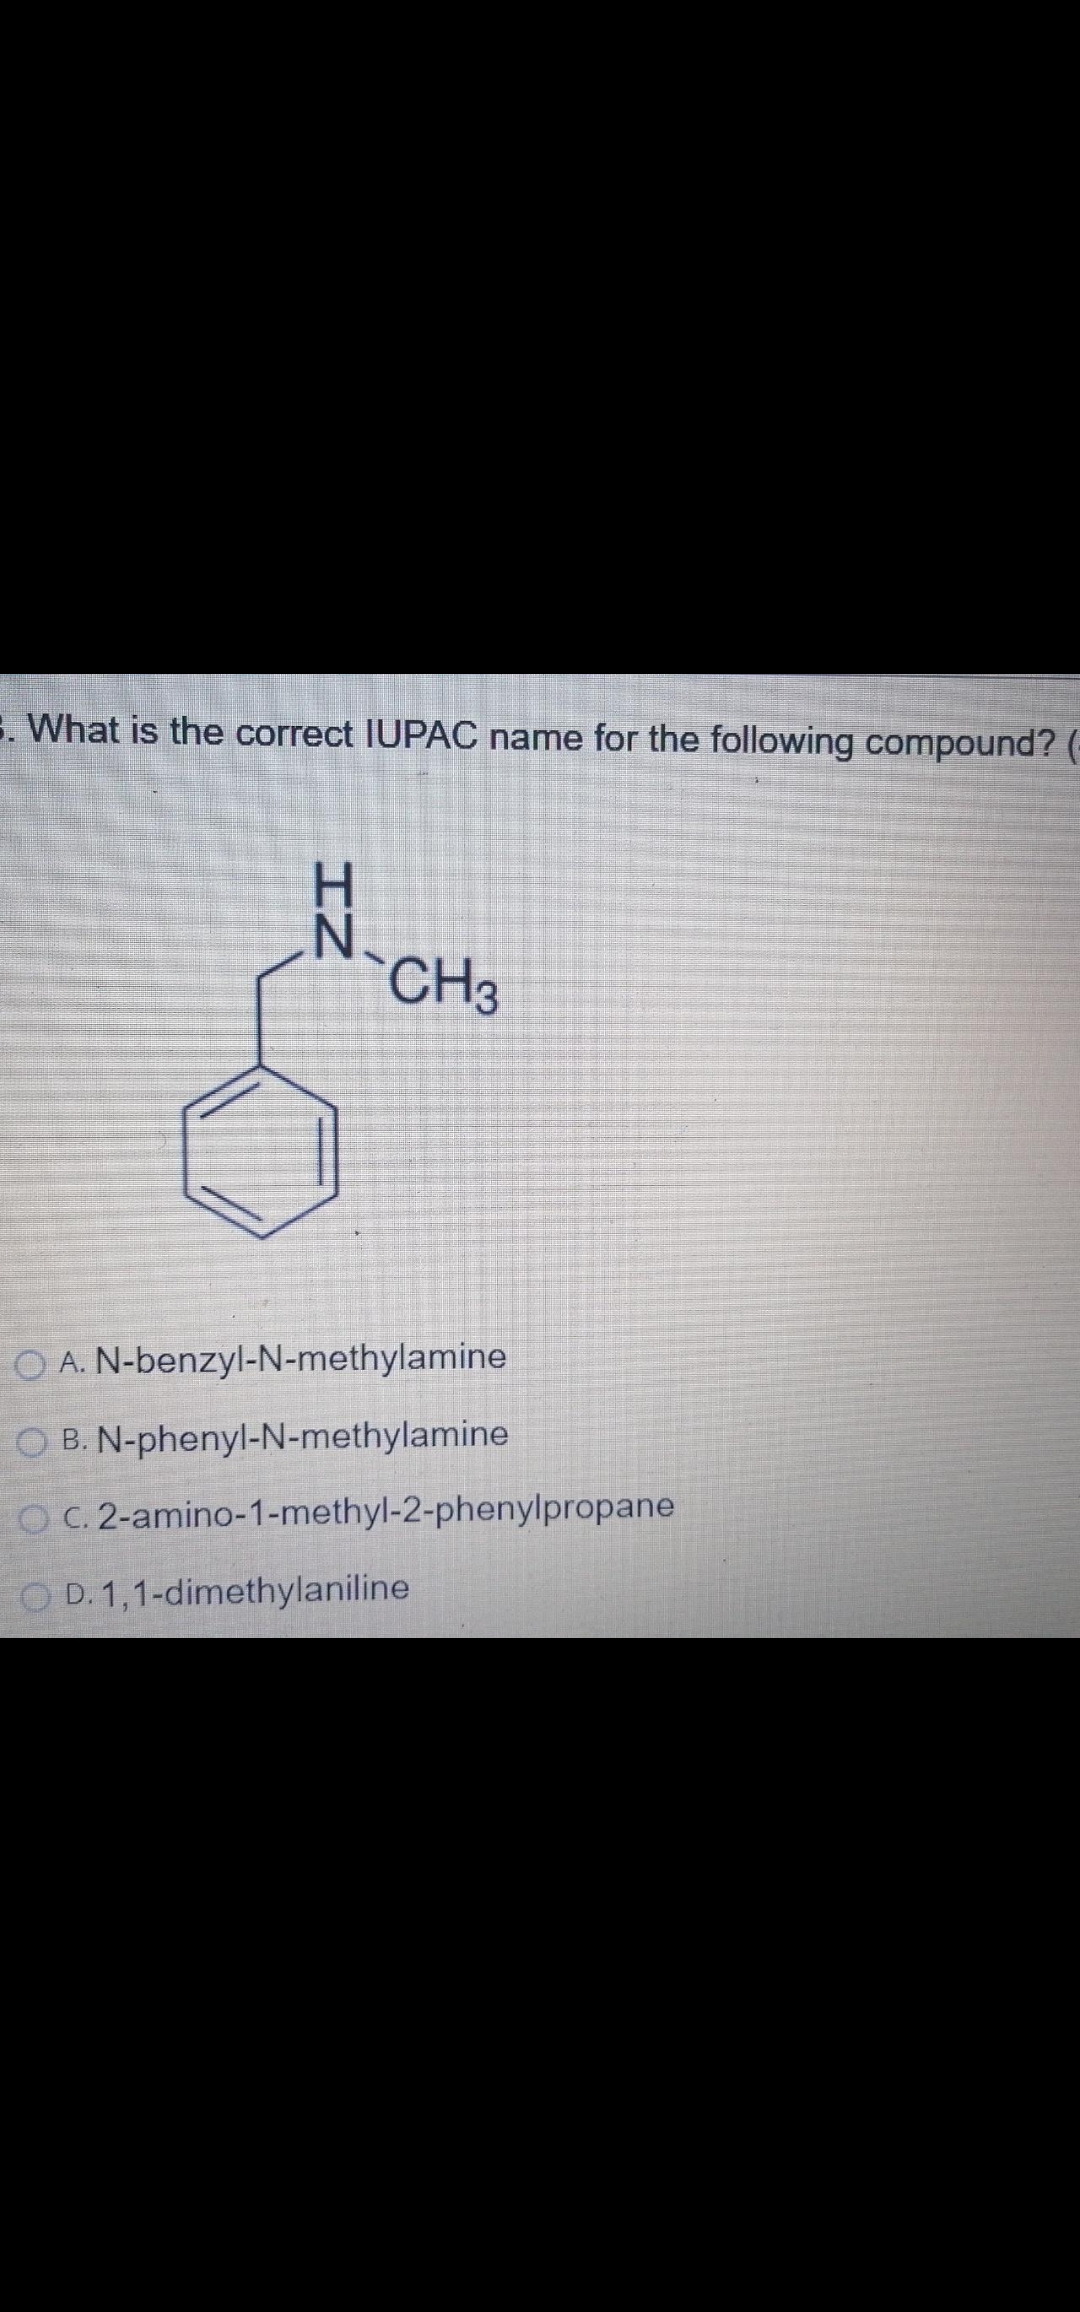 E. What is the correct IUPAC name for the following compound? (-
H.
N.
`CH3
O A. N-benzyl-N-methylamine
O B. N-phenyl-N-methylamine
O C. 2-amino-1-methyl-2-phenylpropane
O D. 1,1-dimethylaniline
